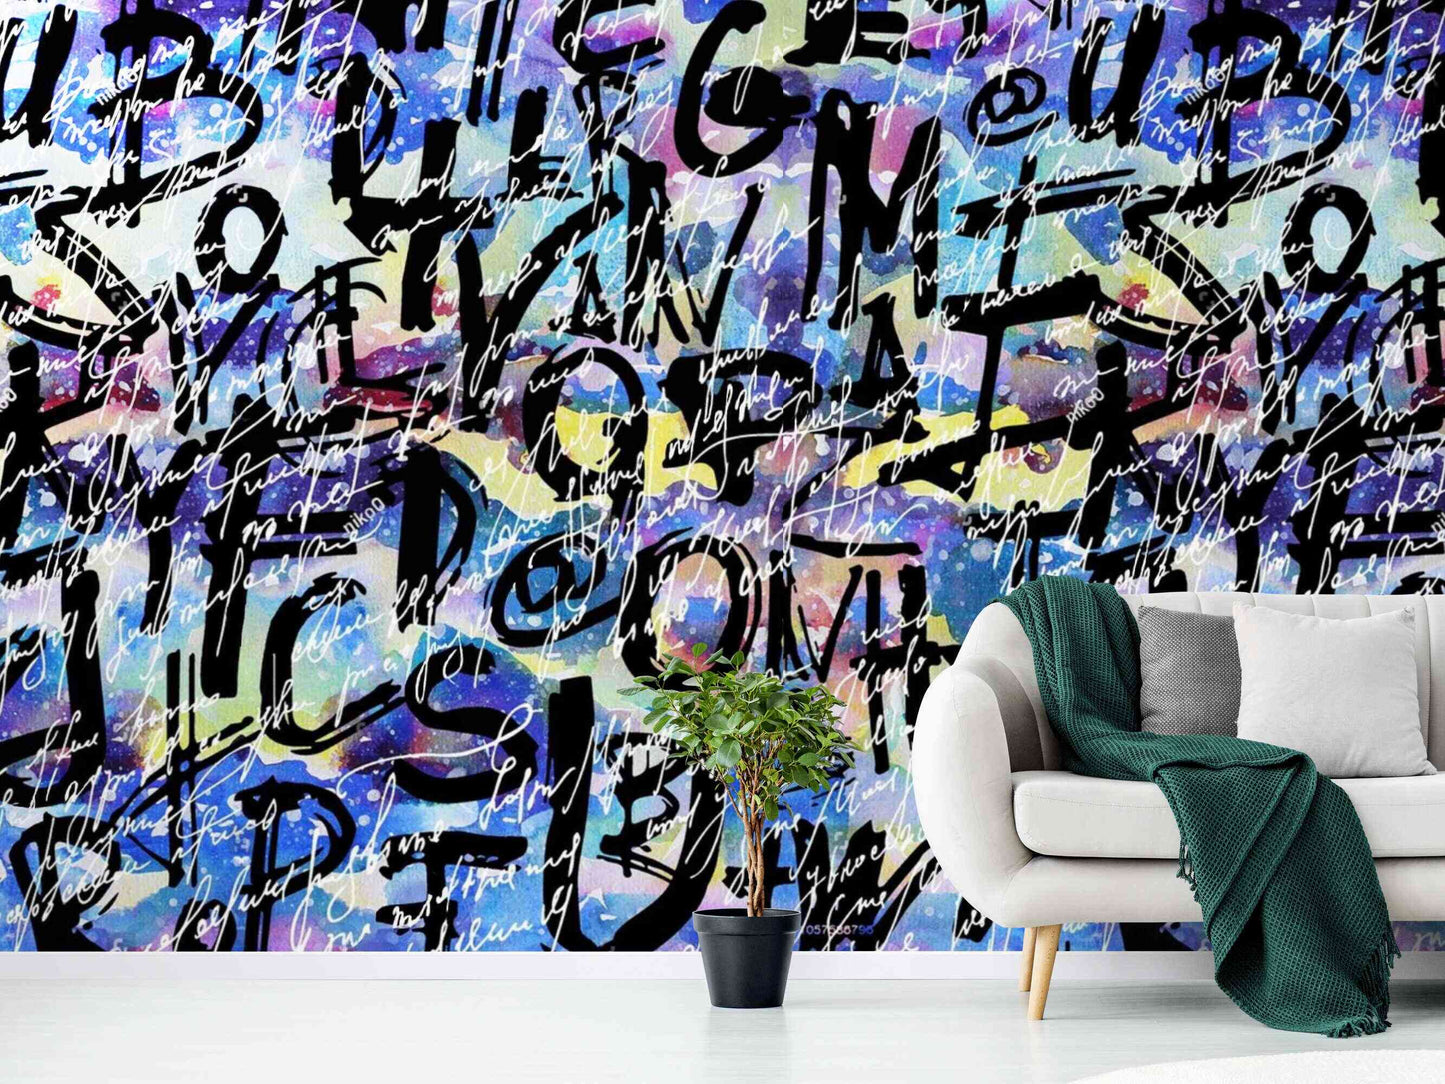 An image of a wallpaper with a graffiti mural design in various colors, including shades of blue, green, pink, orange, and yellow. The design features bold, abstract shapes and lines that resemble street art. The wallpaper is removable, making it easy to install and remove without leaving residue or damaging the wall surface.